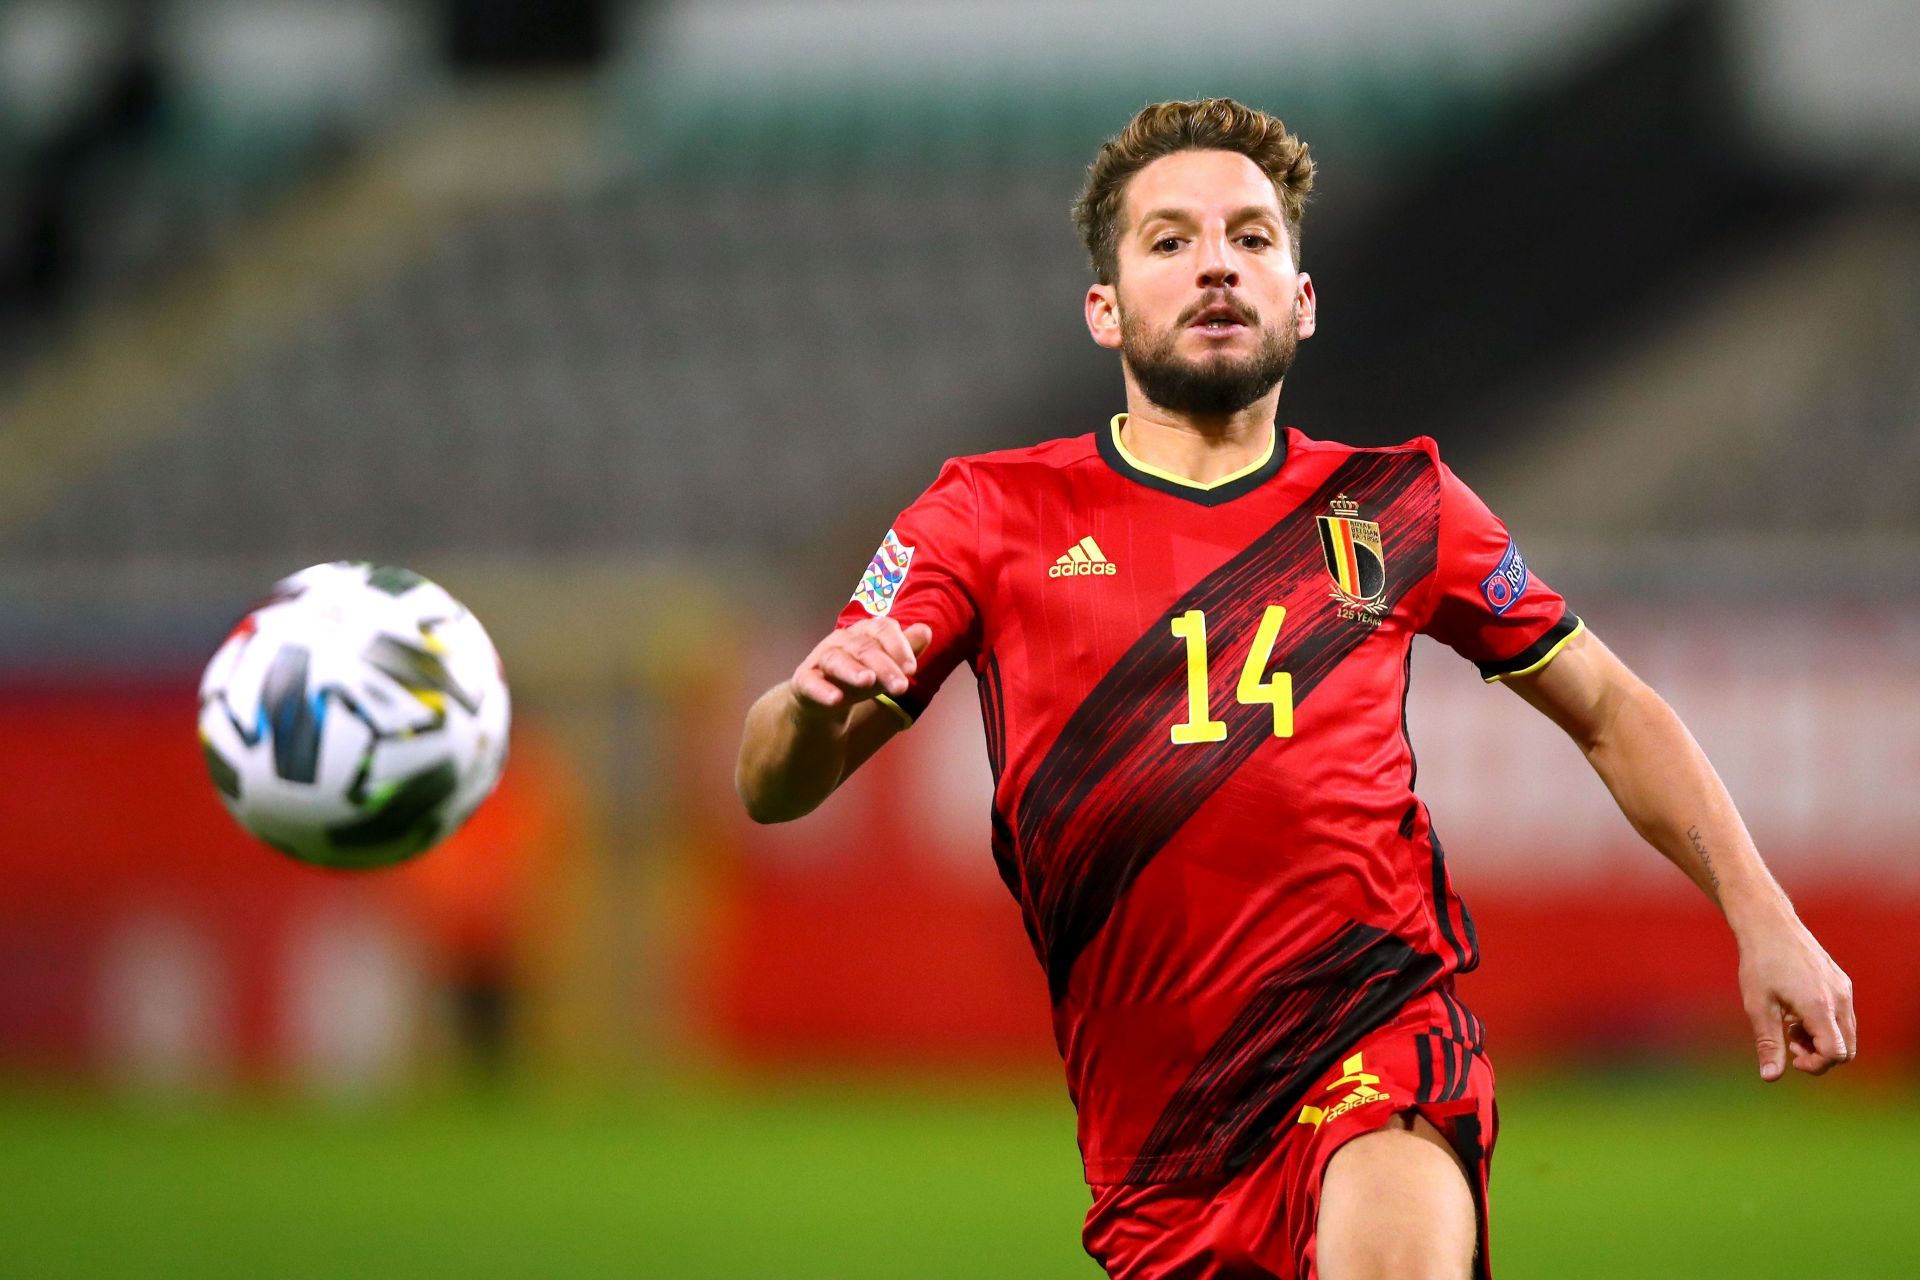 Dries Mertens has been a key player for Napoli and Belgium.